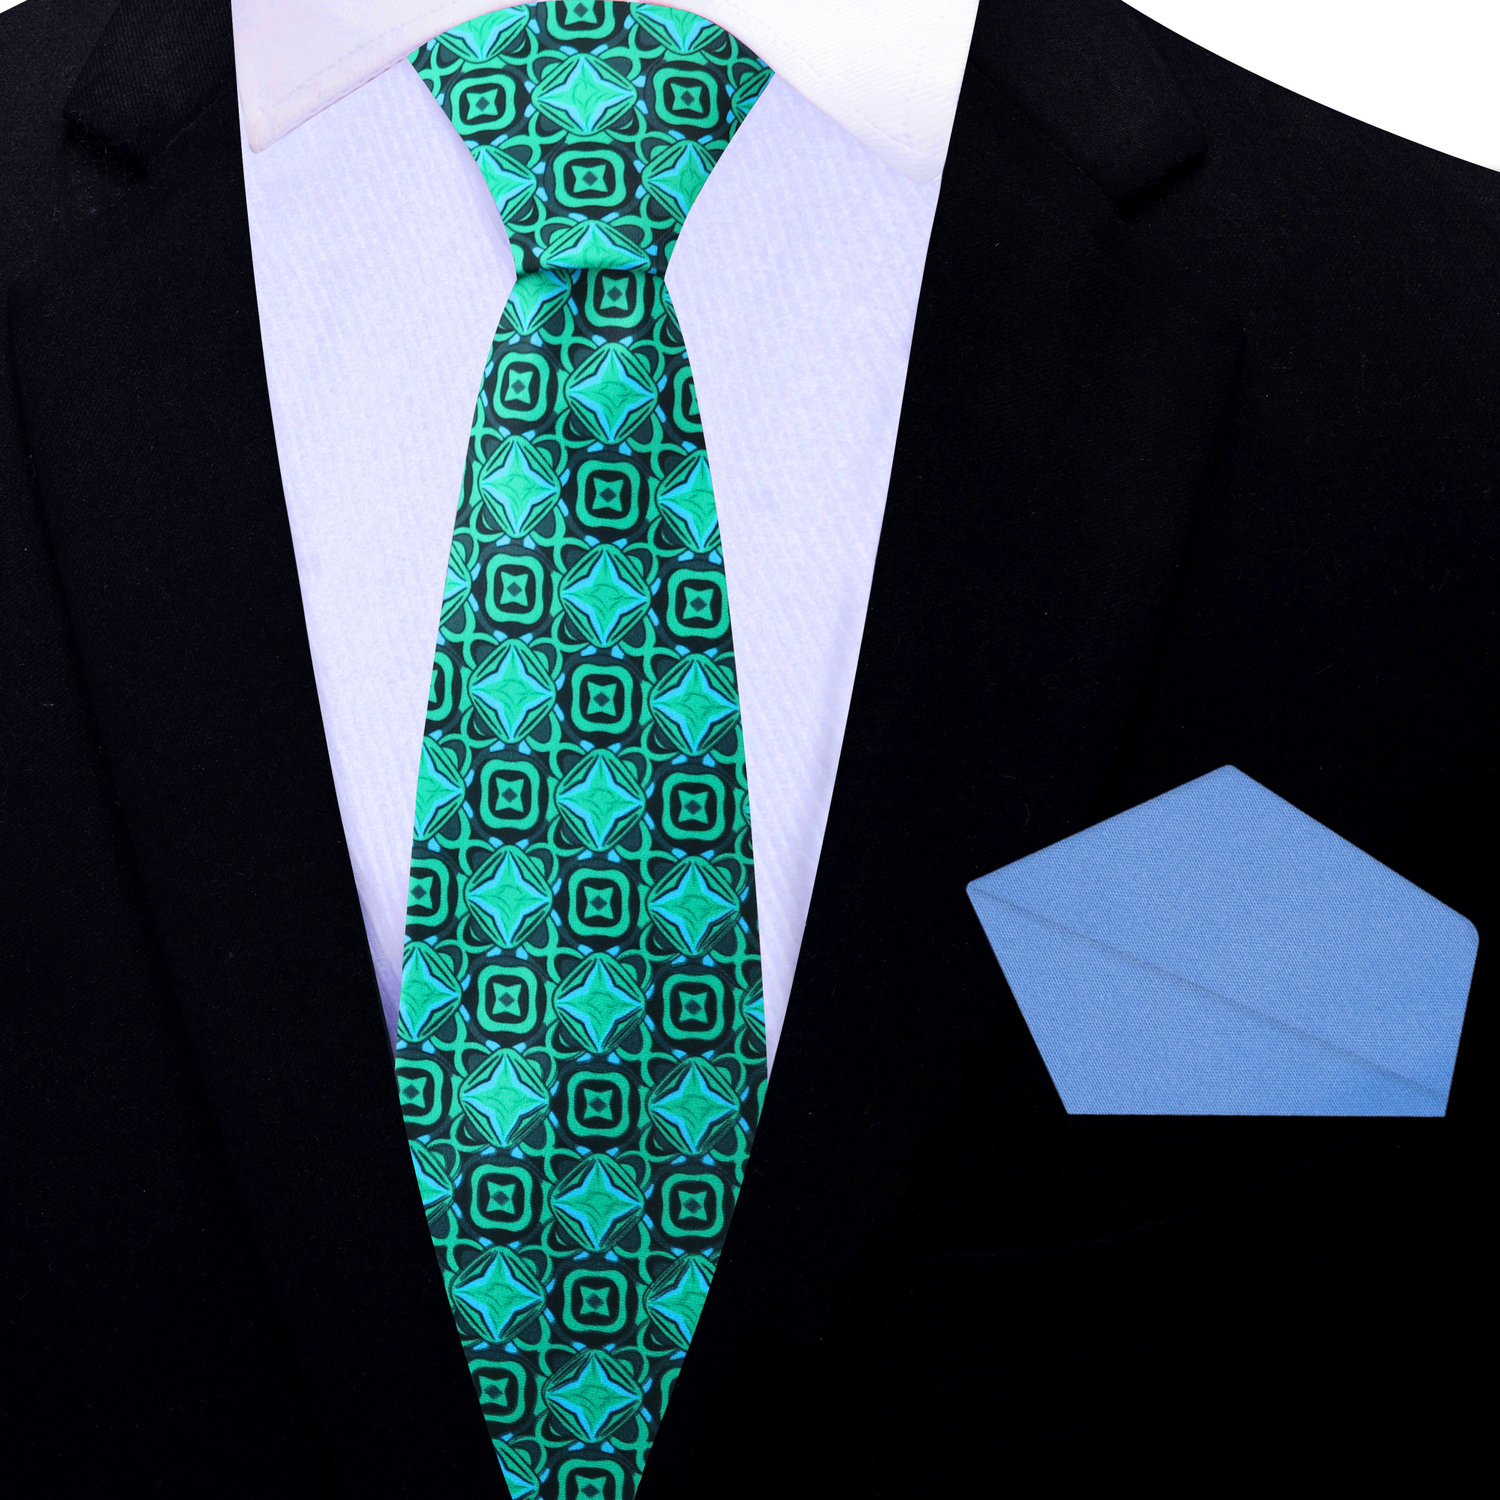 Thin Tie: Green Geometric Tie and Light Blue Square